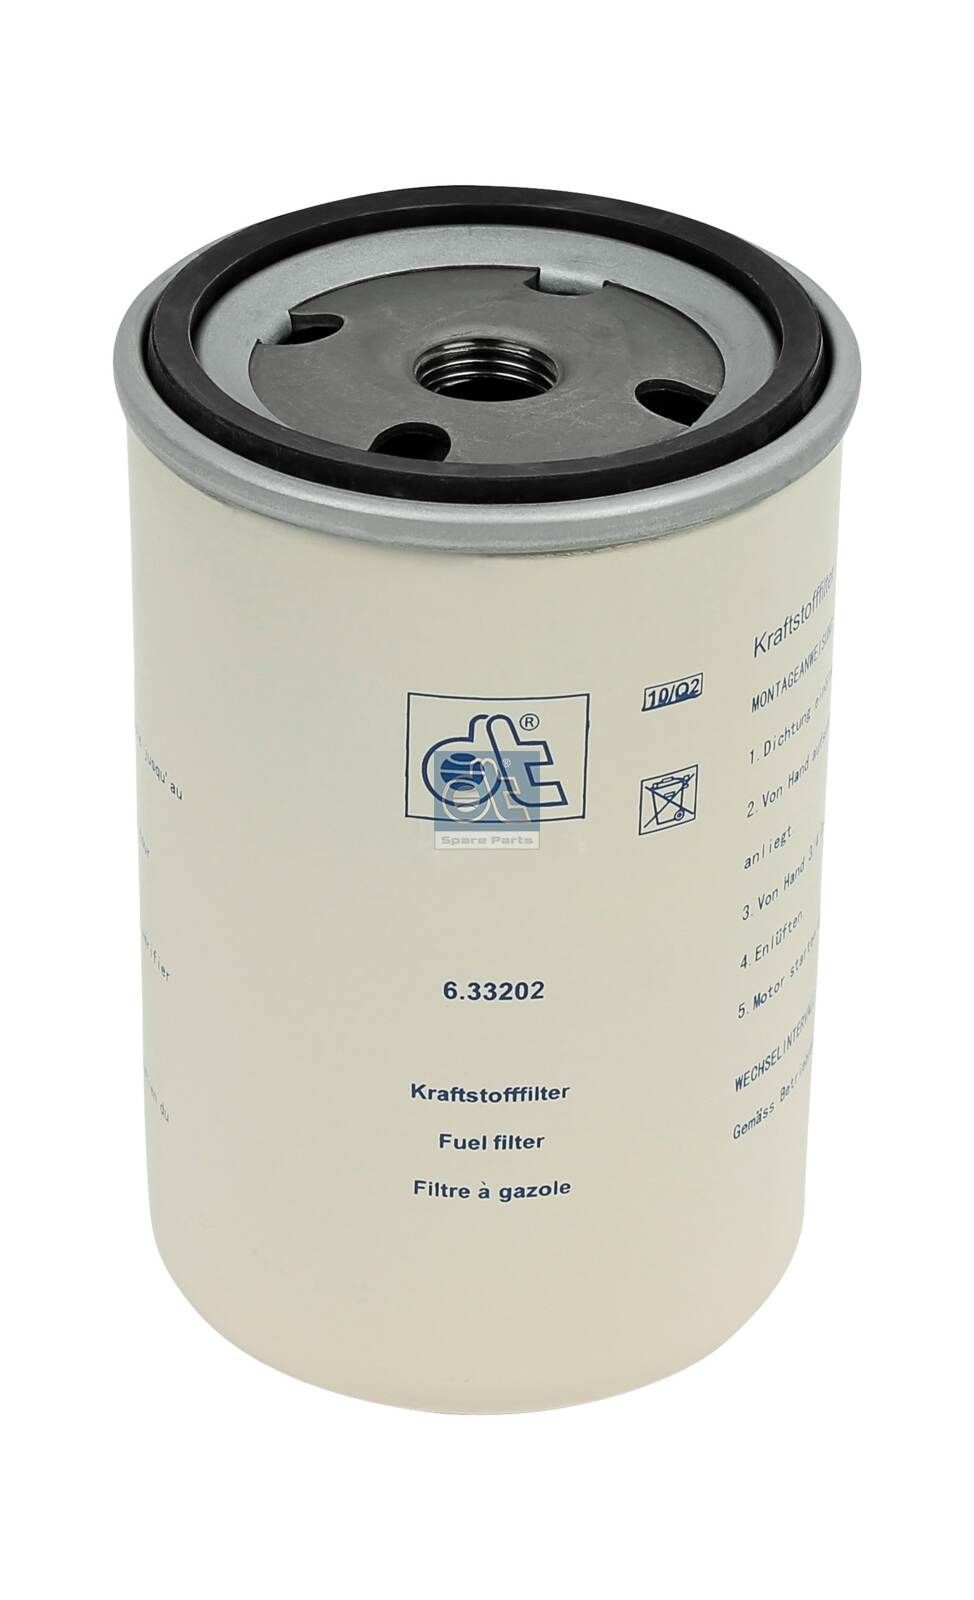 WK 727 DT Spare Parts 6.33202 Fuel filter 5 000 686 590